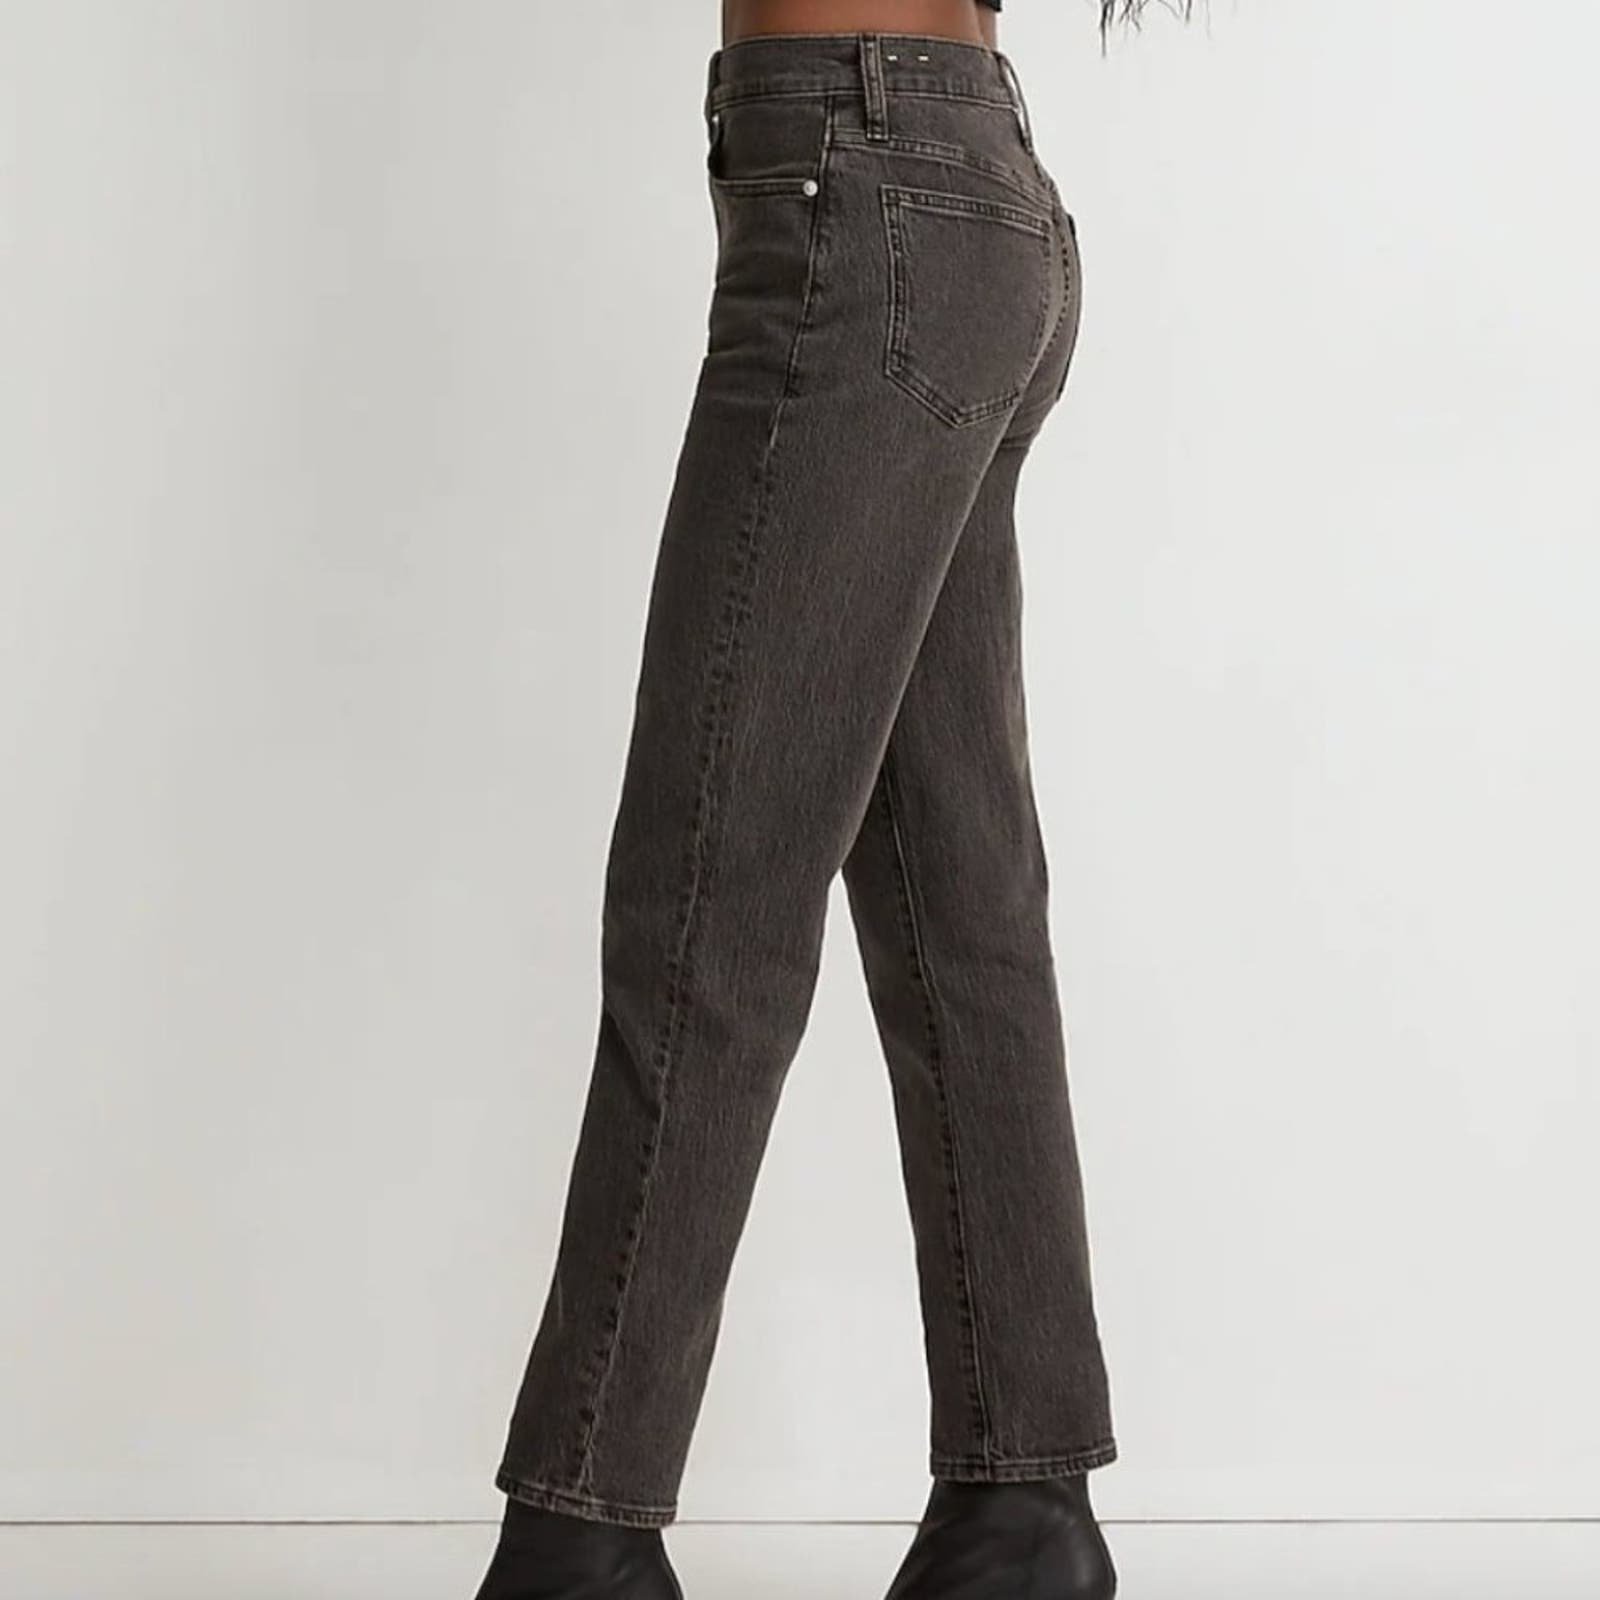 Discounted MADEWELL The Perfect Vintage Jean MD711 Luna